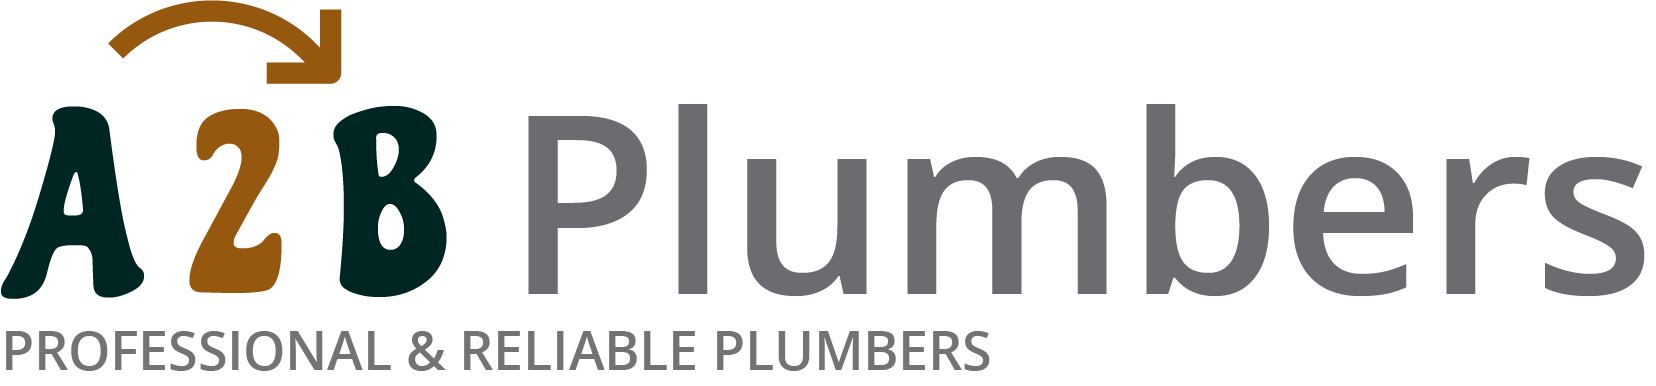 If you need a boiler installed, a radiator repaired or a leaking tap fixed, call us now - we provide services for properties in Luton and the local area.